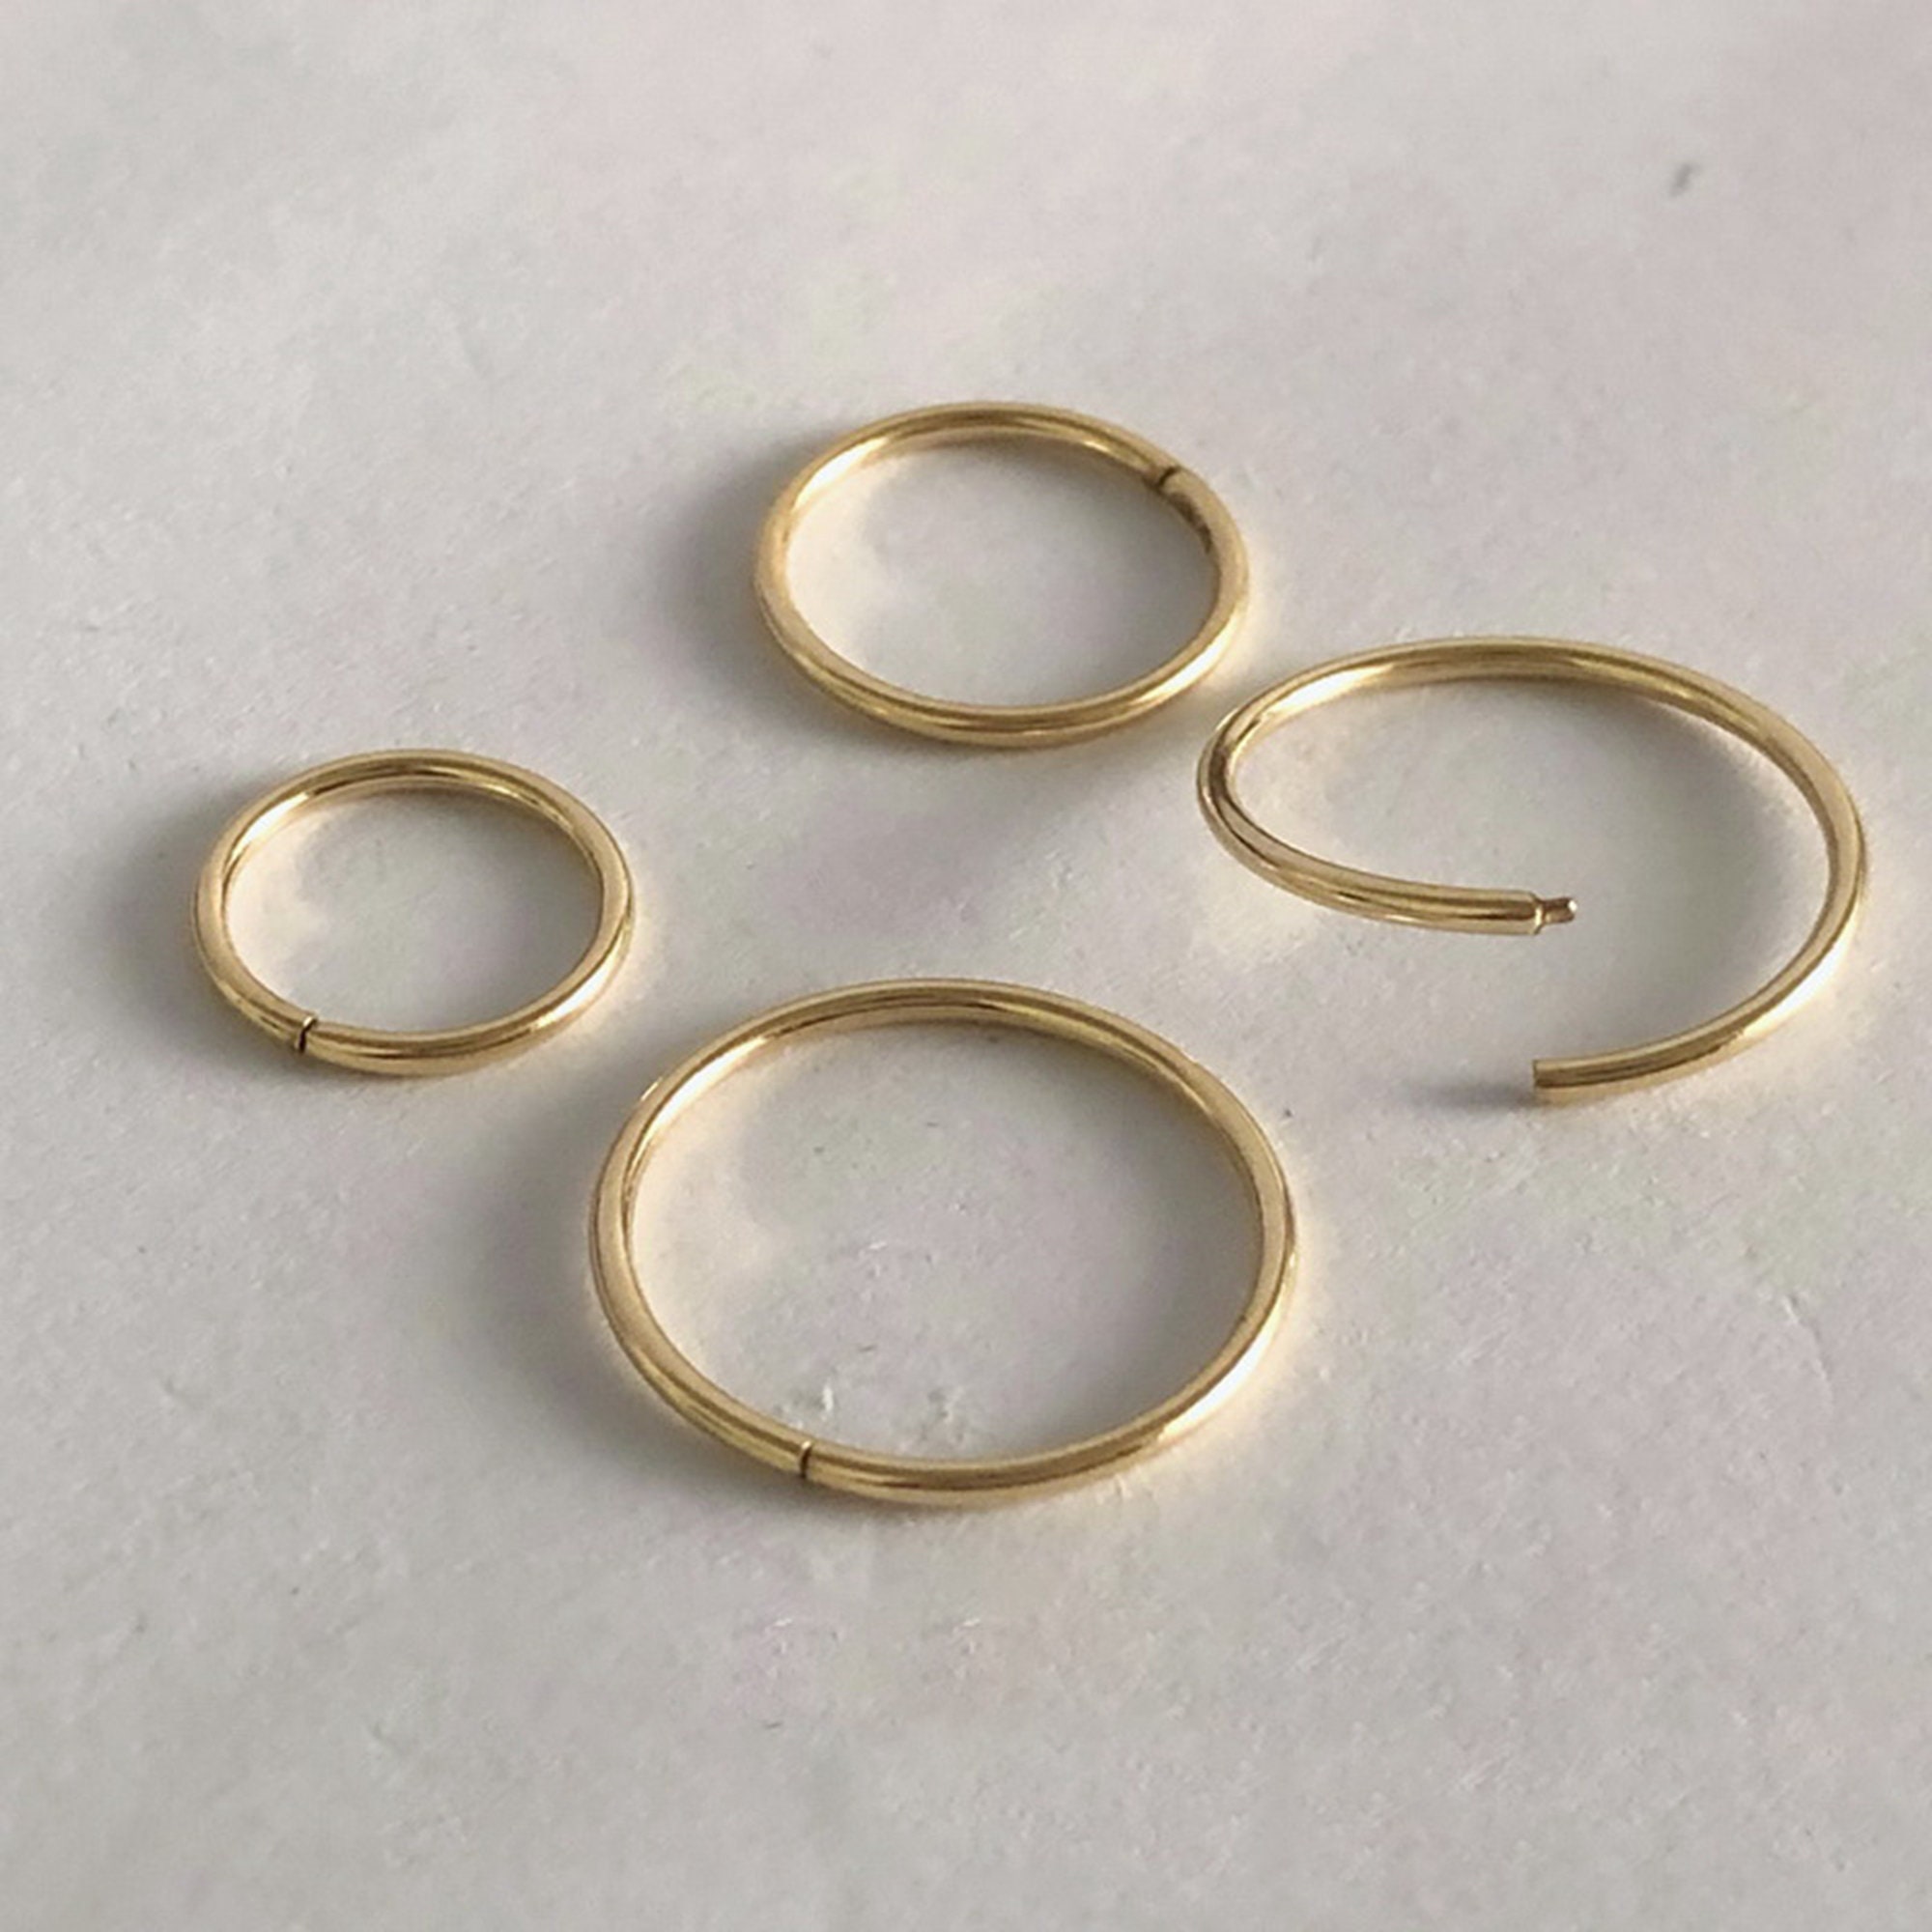 Buy 14K Gold Filled Endless Hoop Earring, Gold Filled Earwire Hoops,  Earring Component, Ear Hoops for Jewelry Making Online in India 